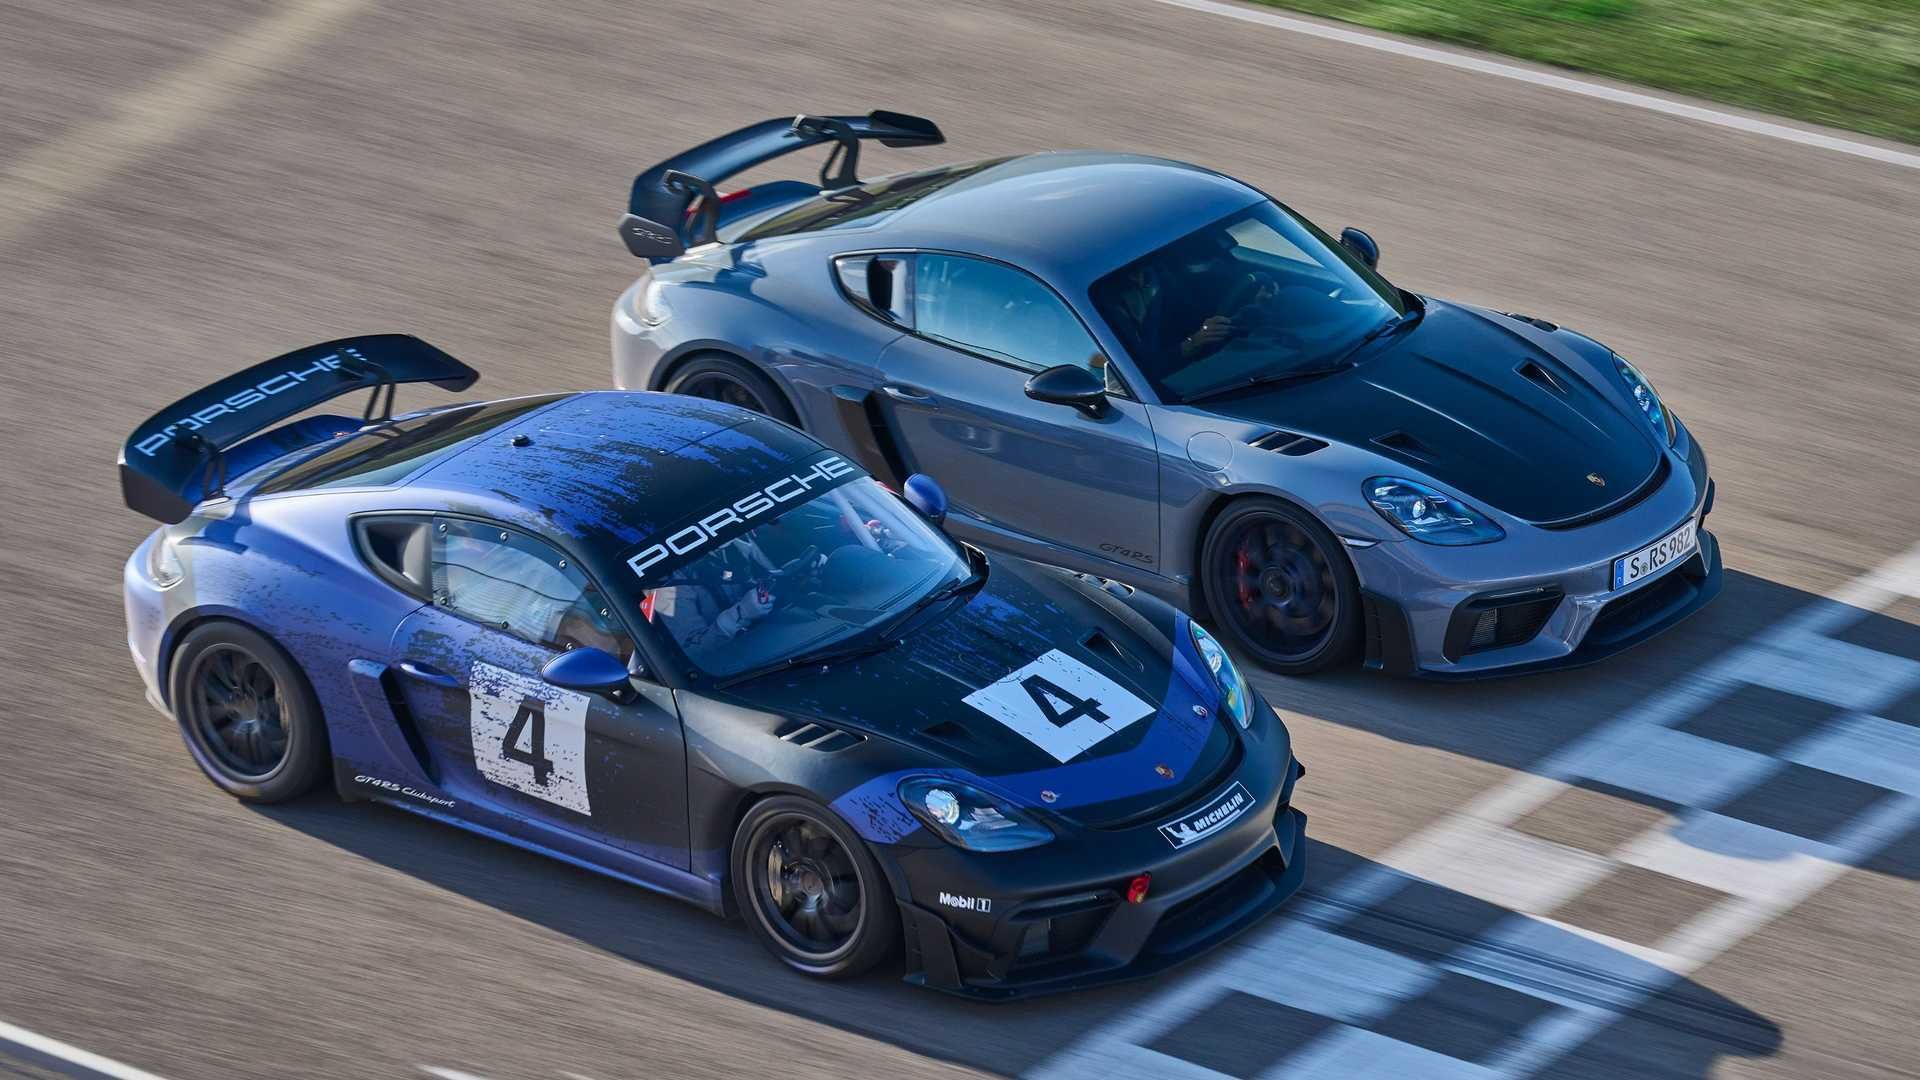 The New Porsche 718 Cayman GT4 RS On The Track